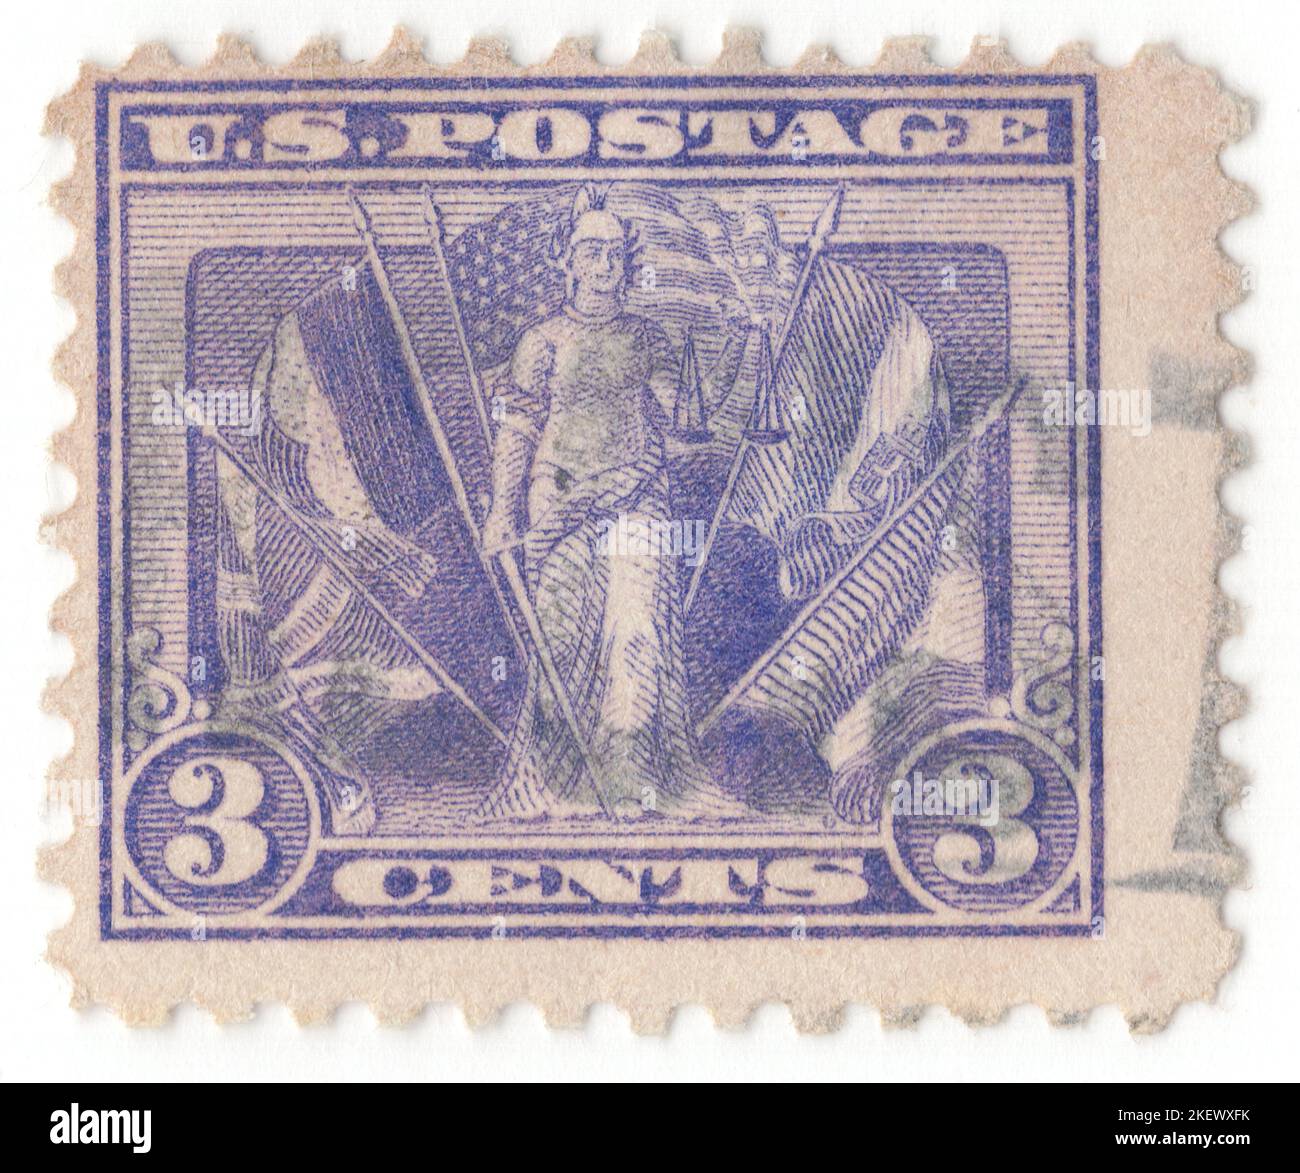 USA - 1919 March 3: An 3 cents violet postage stamp depicting “Victory” and Flags of the Allies. Victory of Allies in World War I. The Allies of World War I, Entente Powers, or Allied Powers were a coalition of countries led by France, the United Kingdom, Russia, Italy, Japan, and the United States against the Central Powers of Germany, Austria-Hungary, the Ottoman Empire, Bulgaria, and their colonies during the First World War (1914–1918) Stock Photo